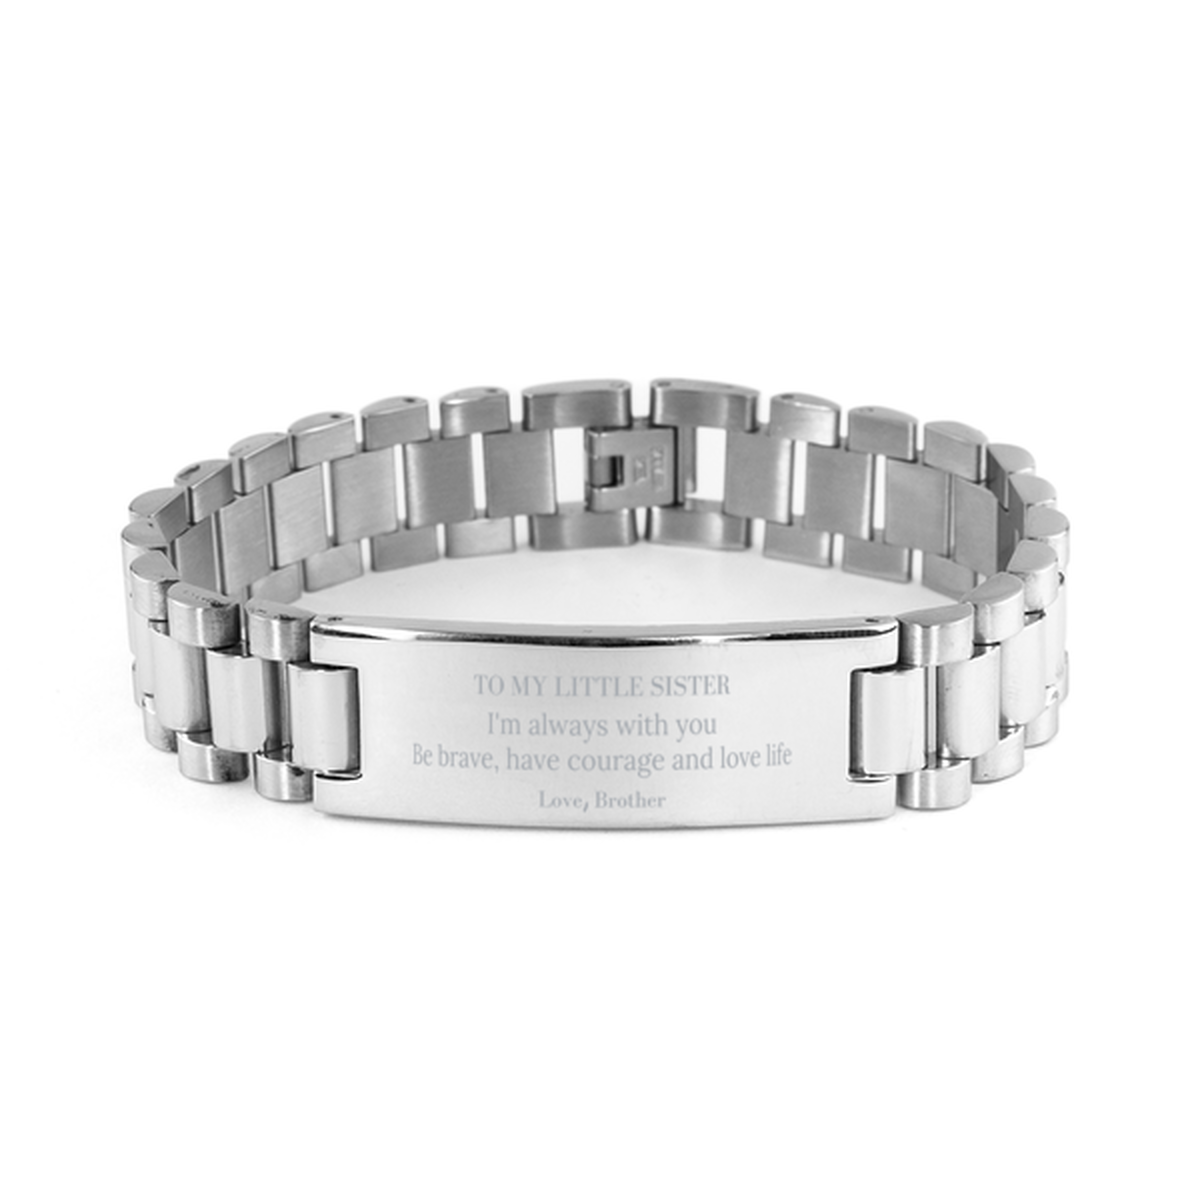 To My Little Sister Gifts from Brother, Unique Ladder Stainless Steel Bracelet Inspirational Christmas Birthday Graduation Gifts for Little Sister I'm always with you. Be brave, have courage and love life. Love, Brother